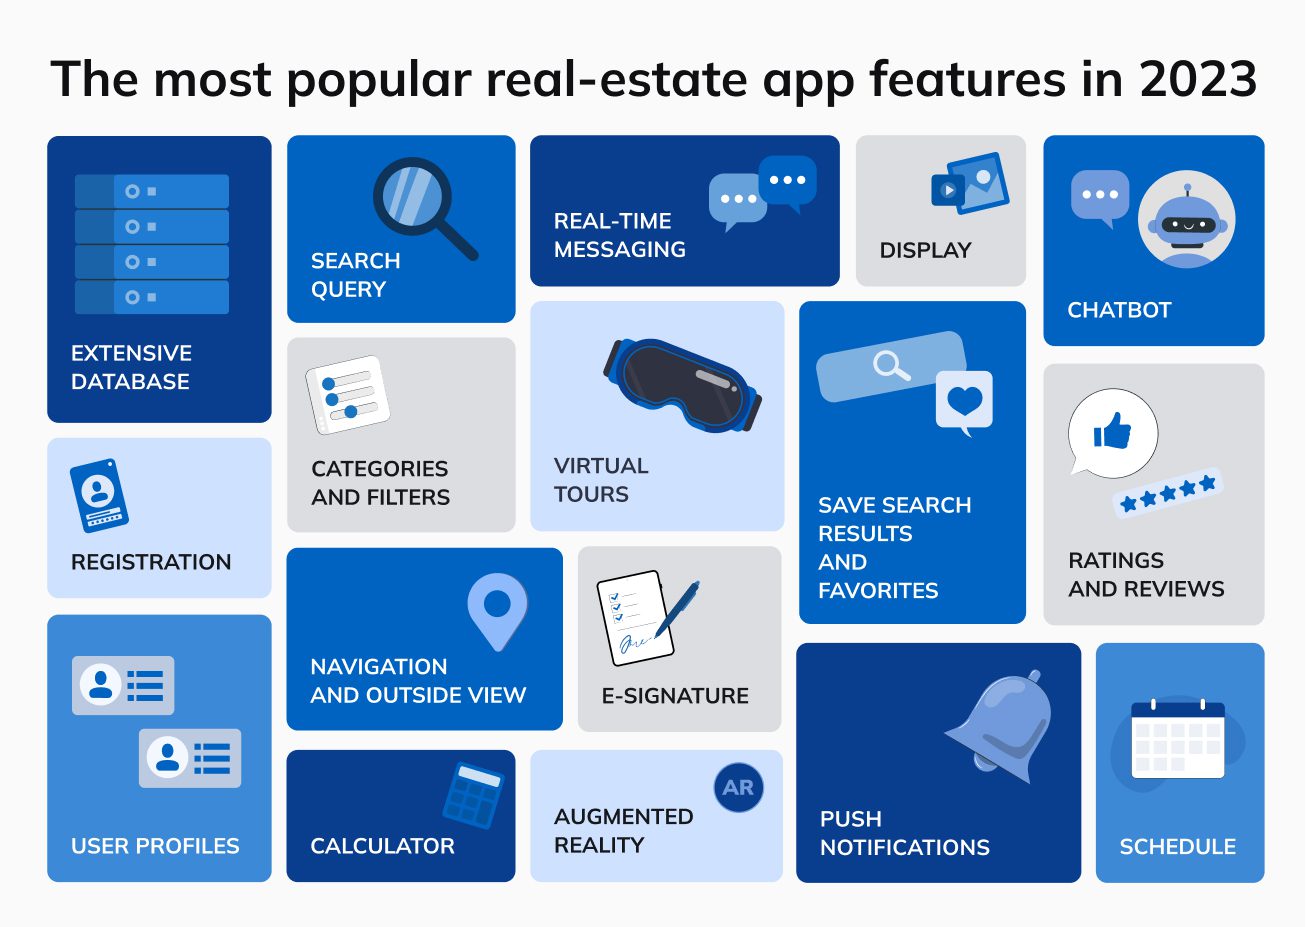 The most popular real estate app features in 2023